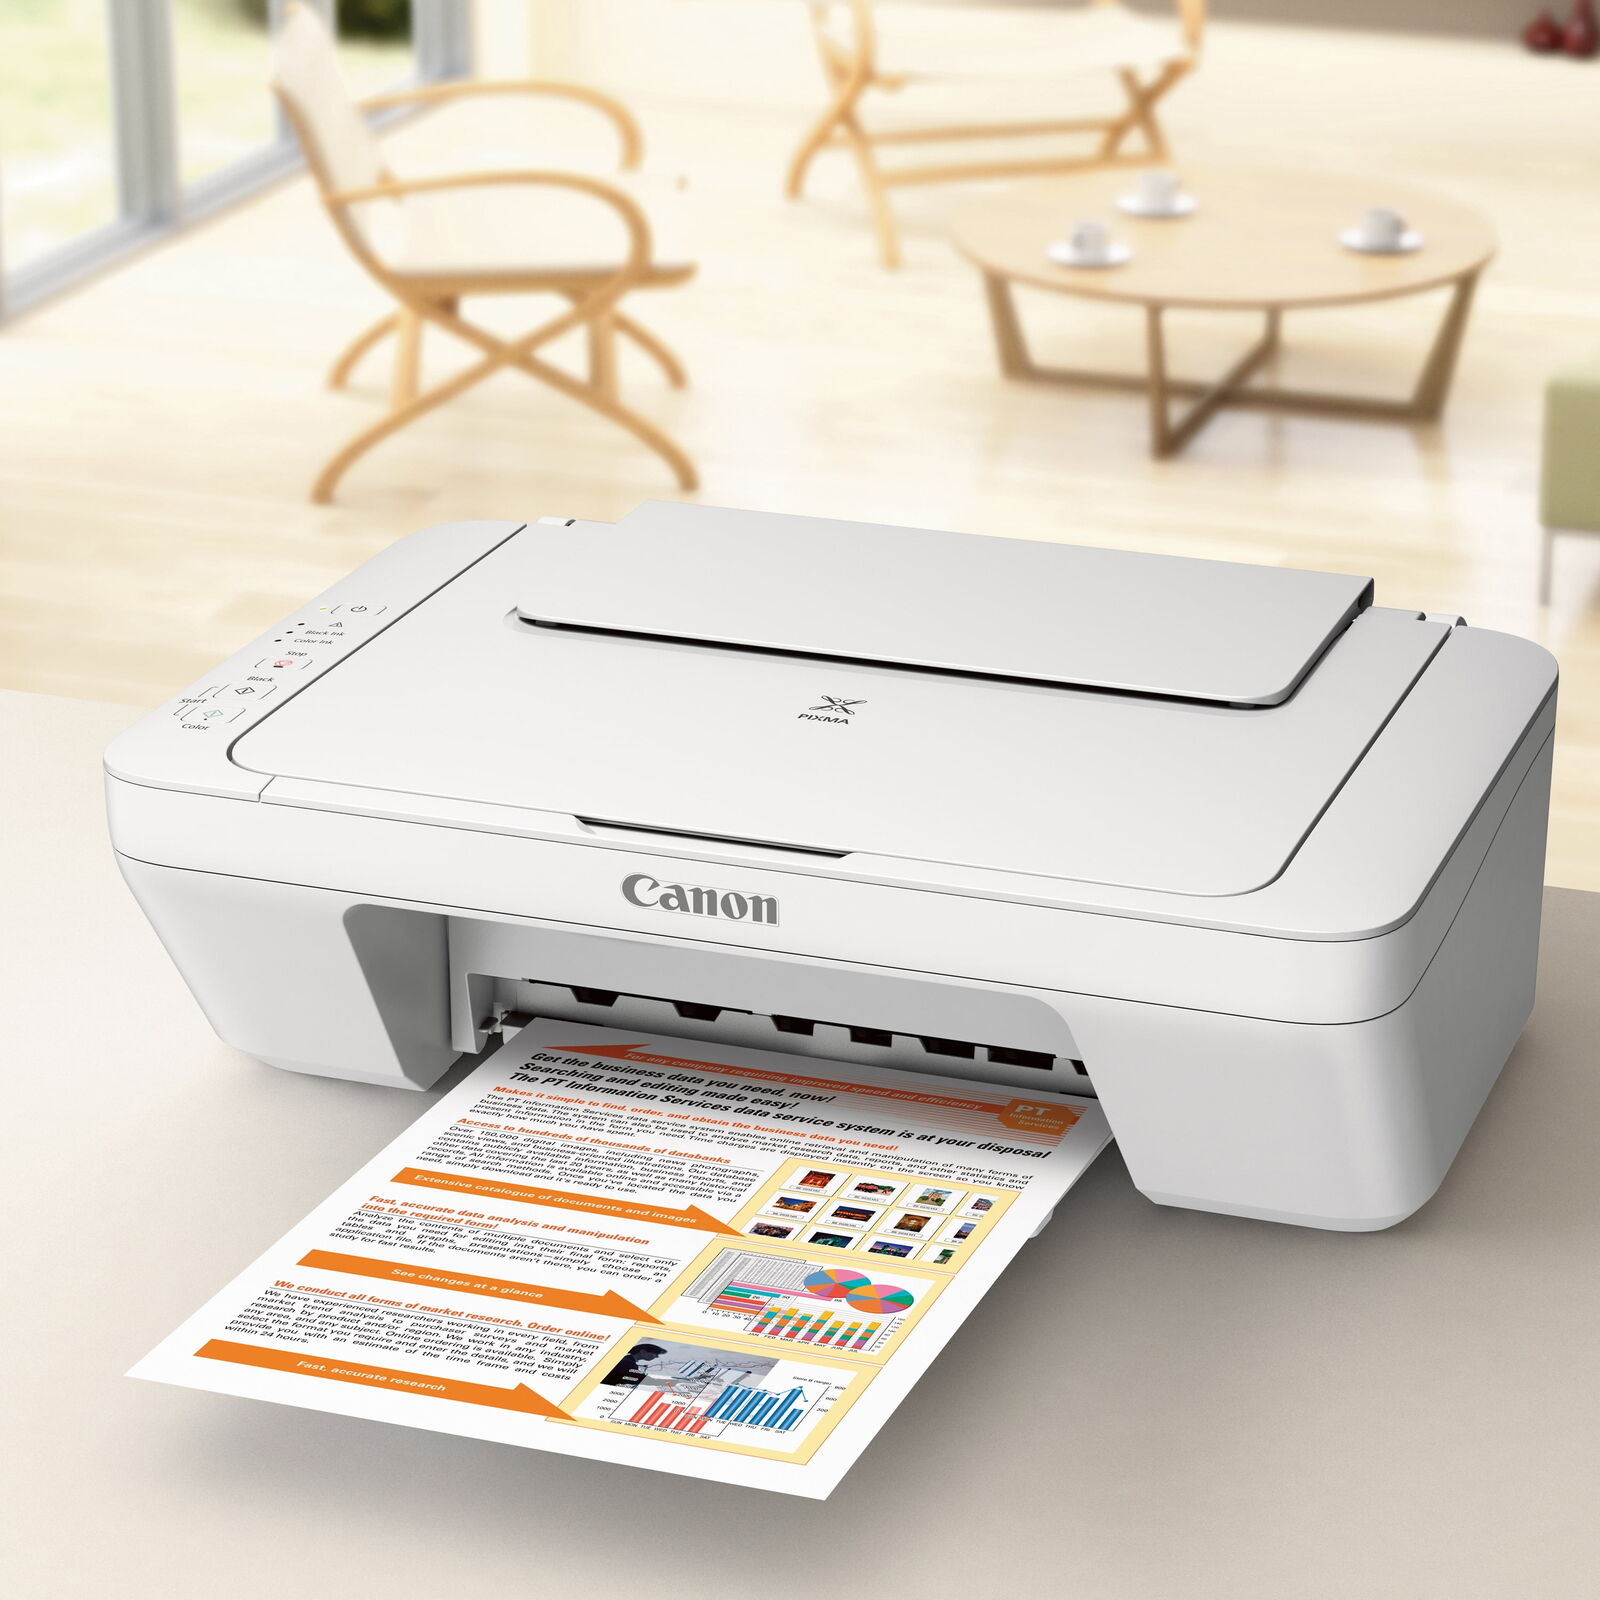 PIXMA MG2522 Wired All-in-One Color Inkjet Printer [USB Cable Included], White,A